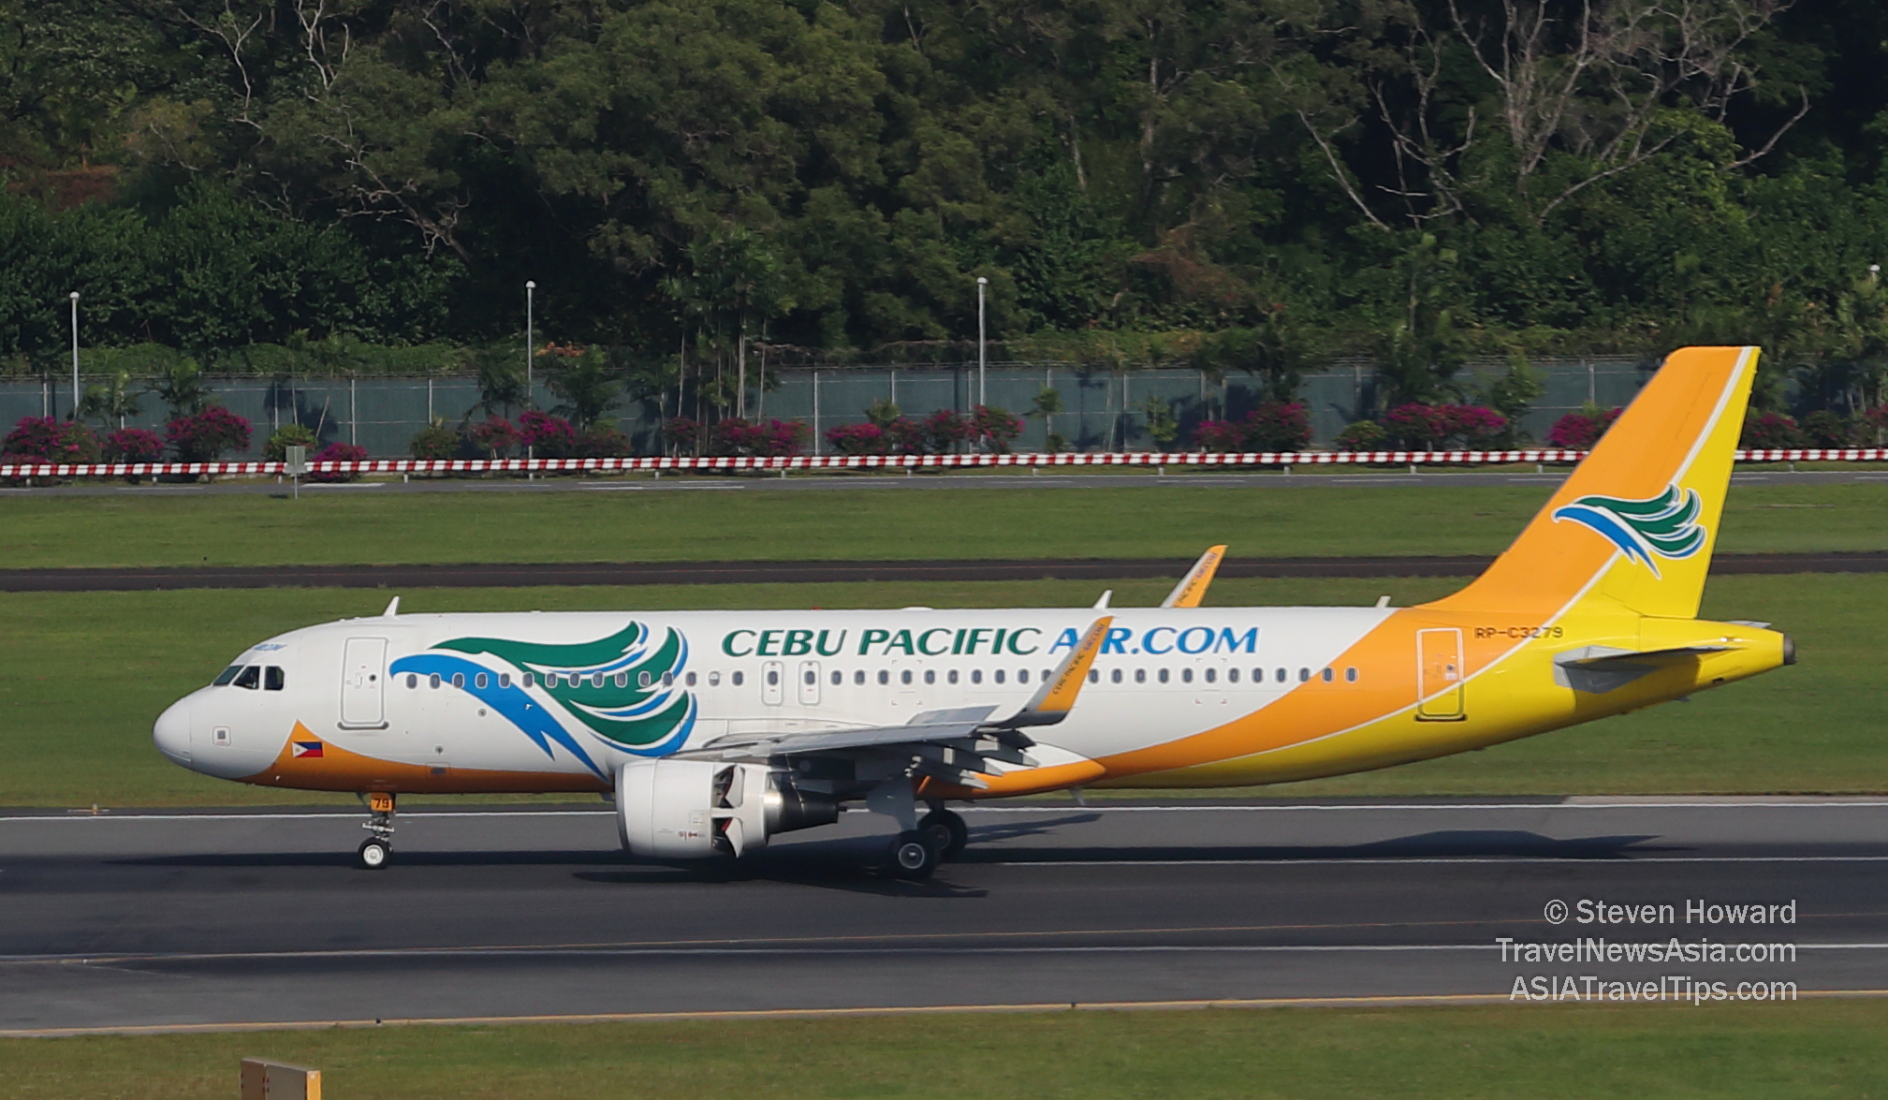 Cebu Pacific A320 reg: RP3279. Picture by Steven Howard of TravelNewsAsia.com Click to enlarge.